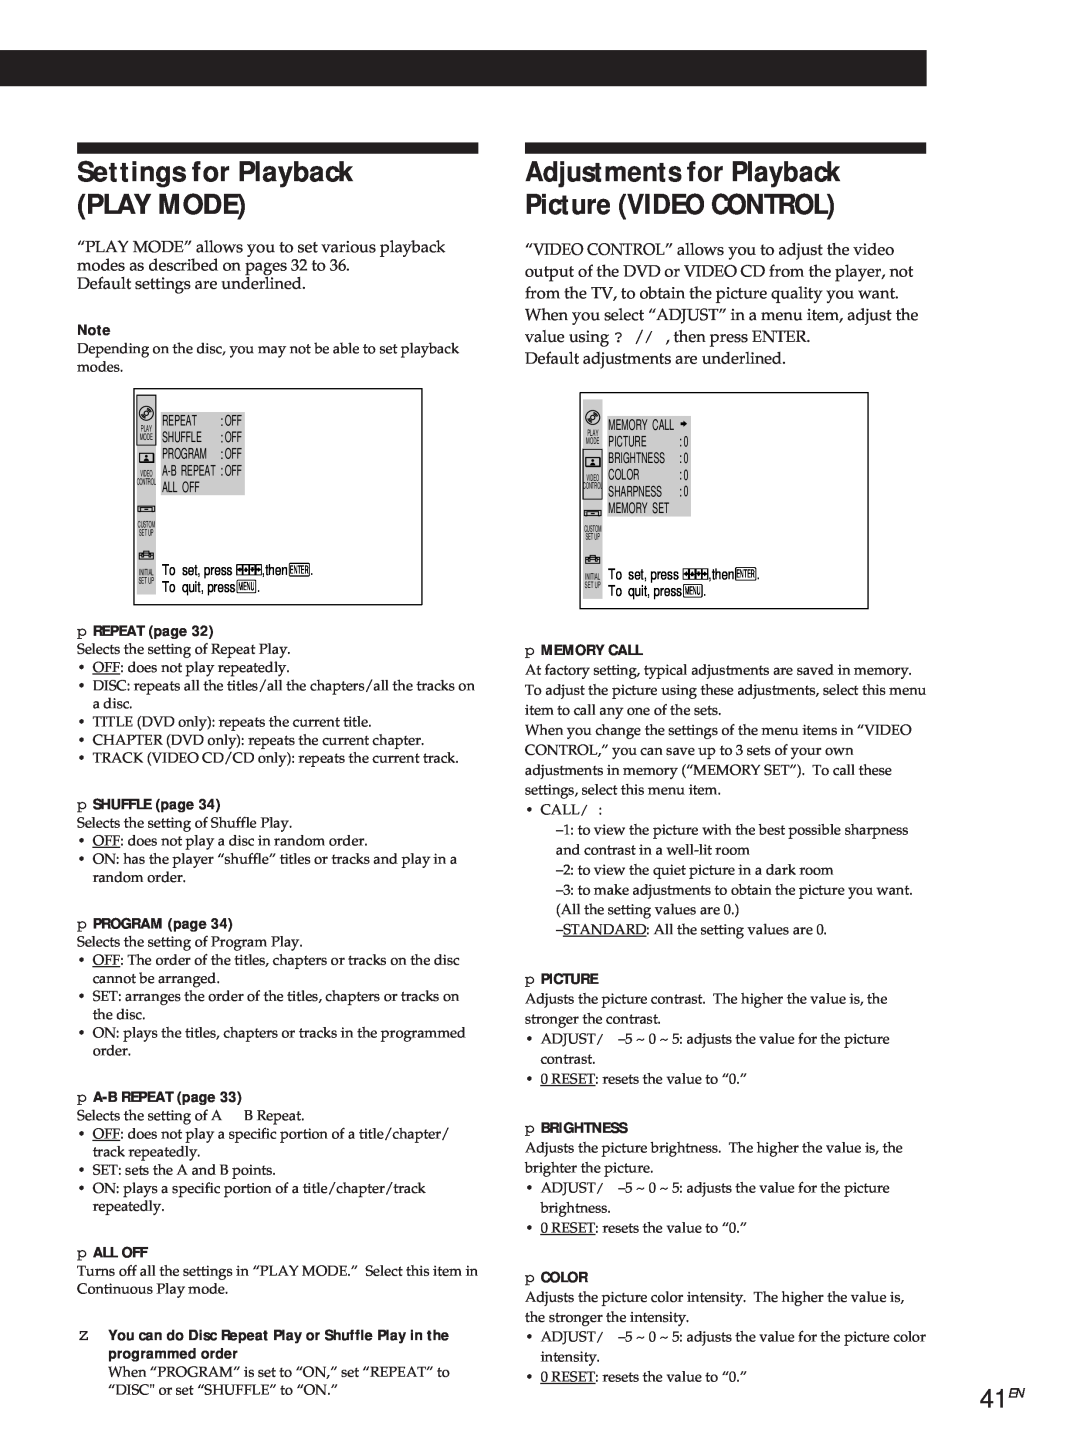 Sony DVP3980 Adjustments for Playback Picture VIDEO CONTROL, Settings for Playback PLAY MODE, 41EN, p REPEAT page, p COLOR 